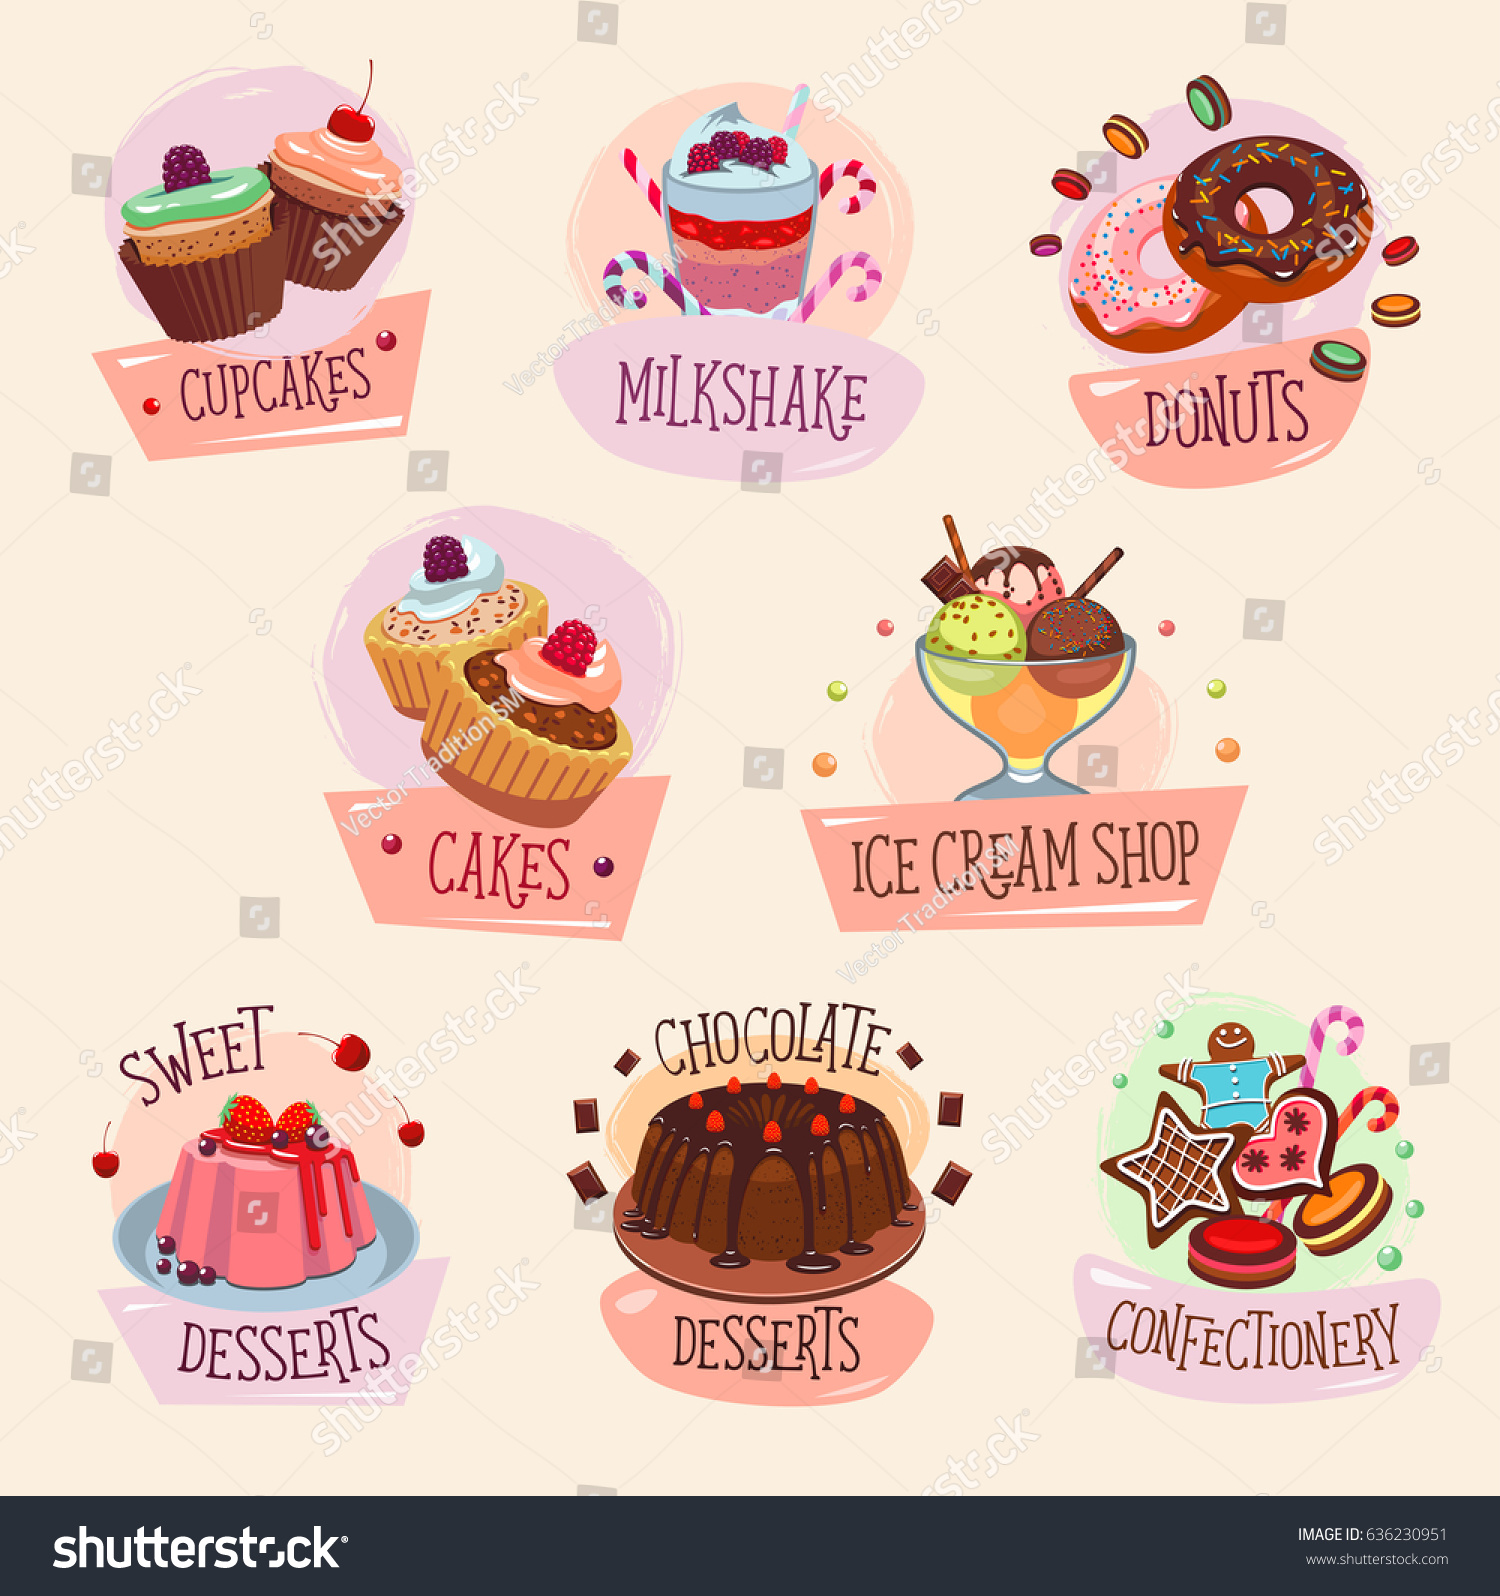 Desserts Pastry Cakes Vector Icons Set Stock Vector 636230951 ...